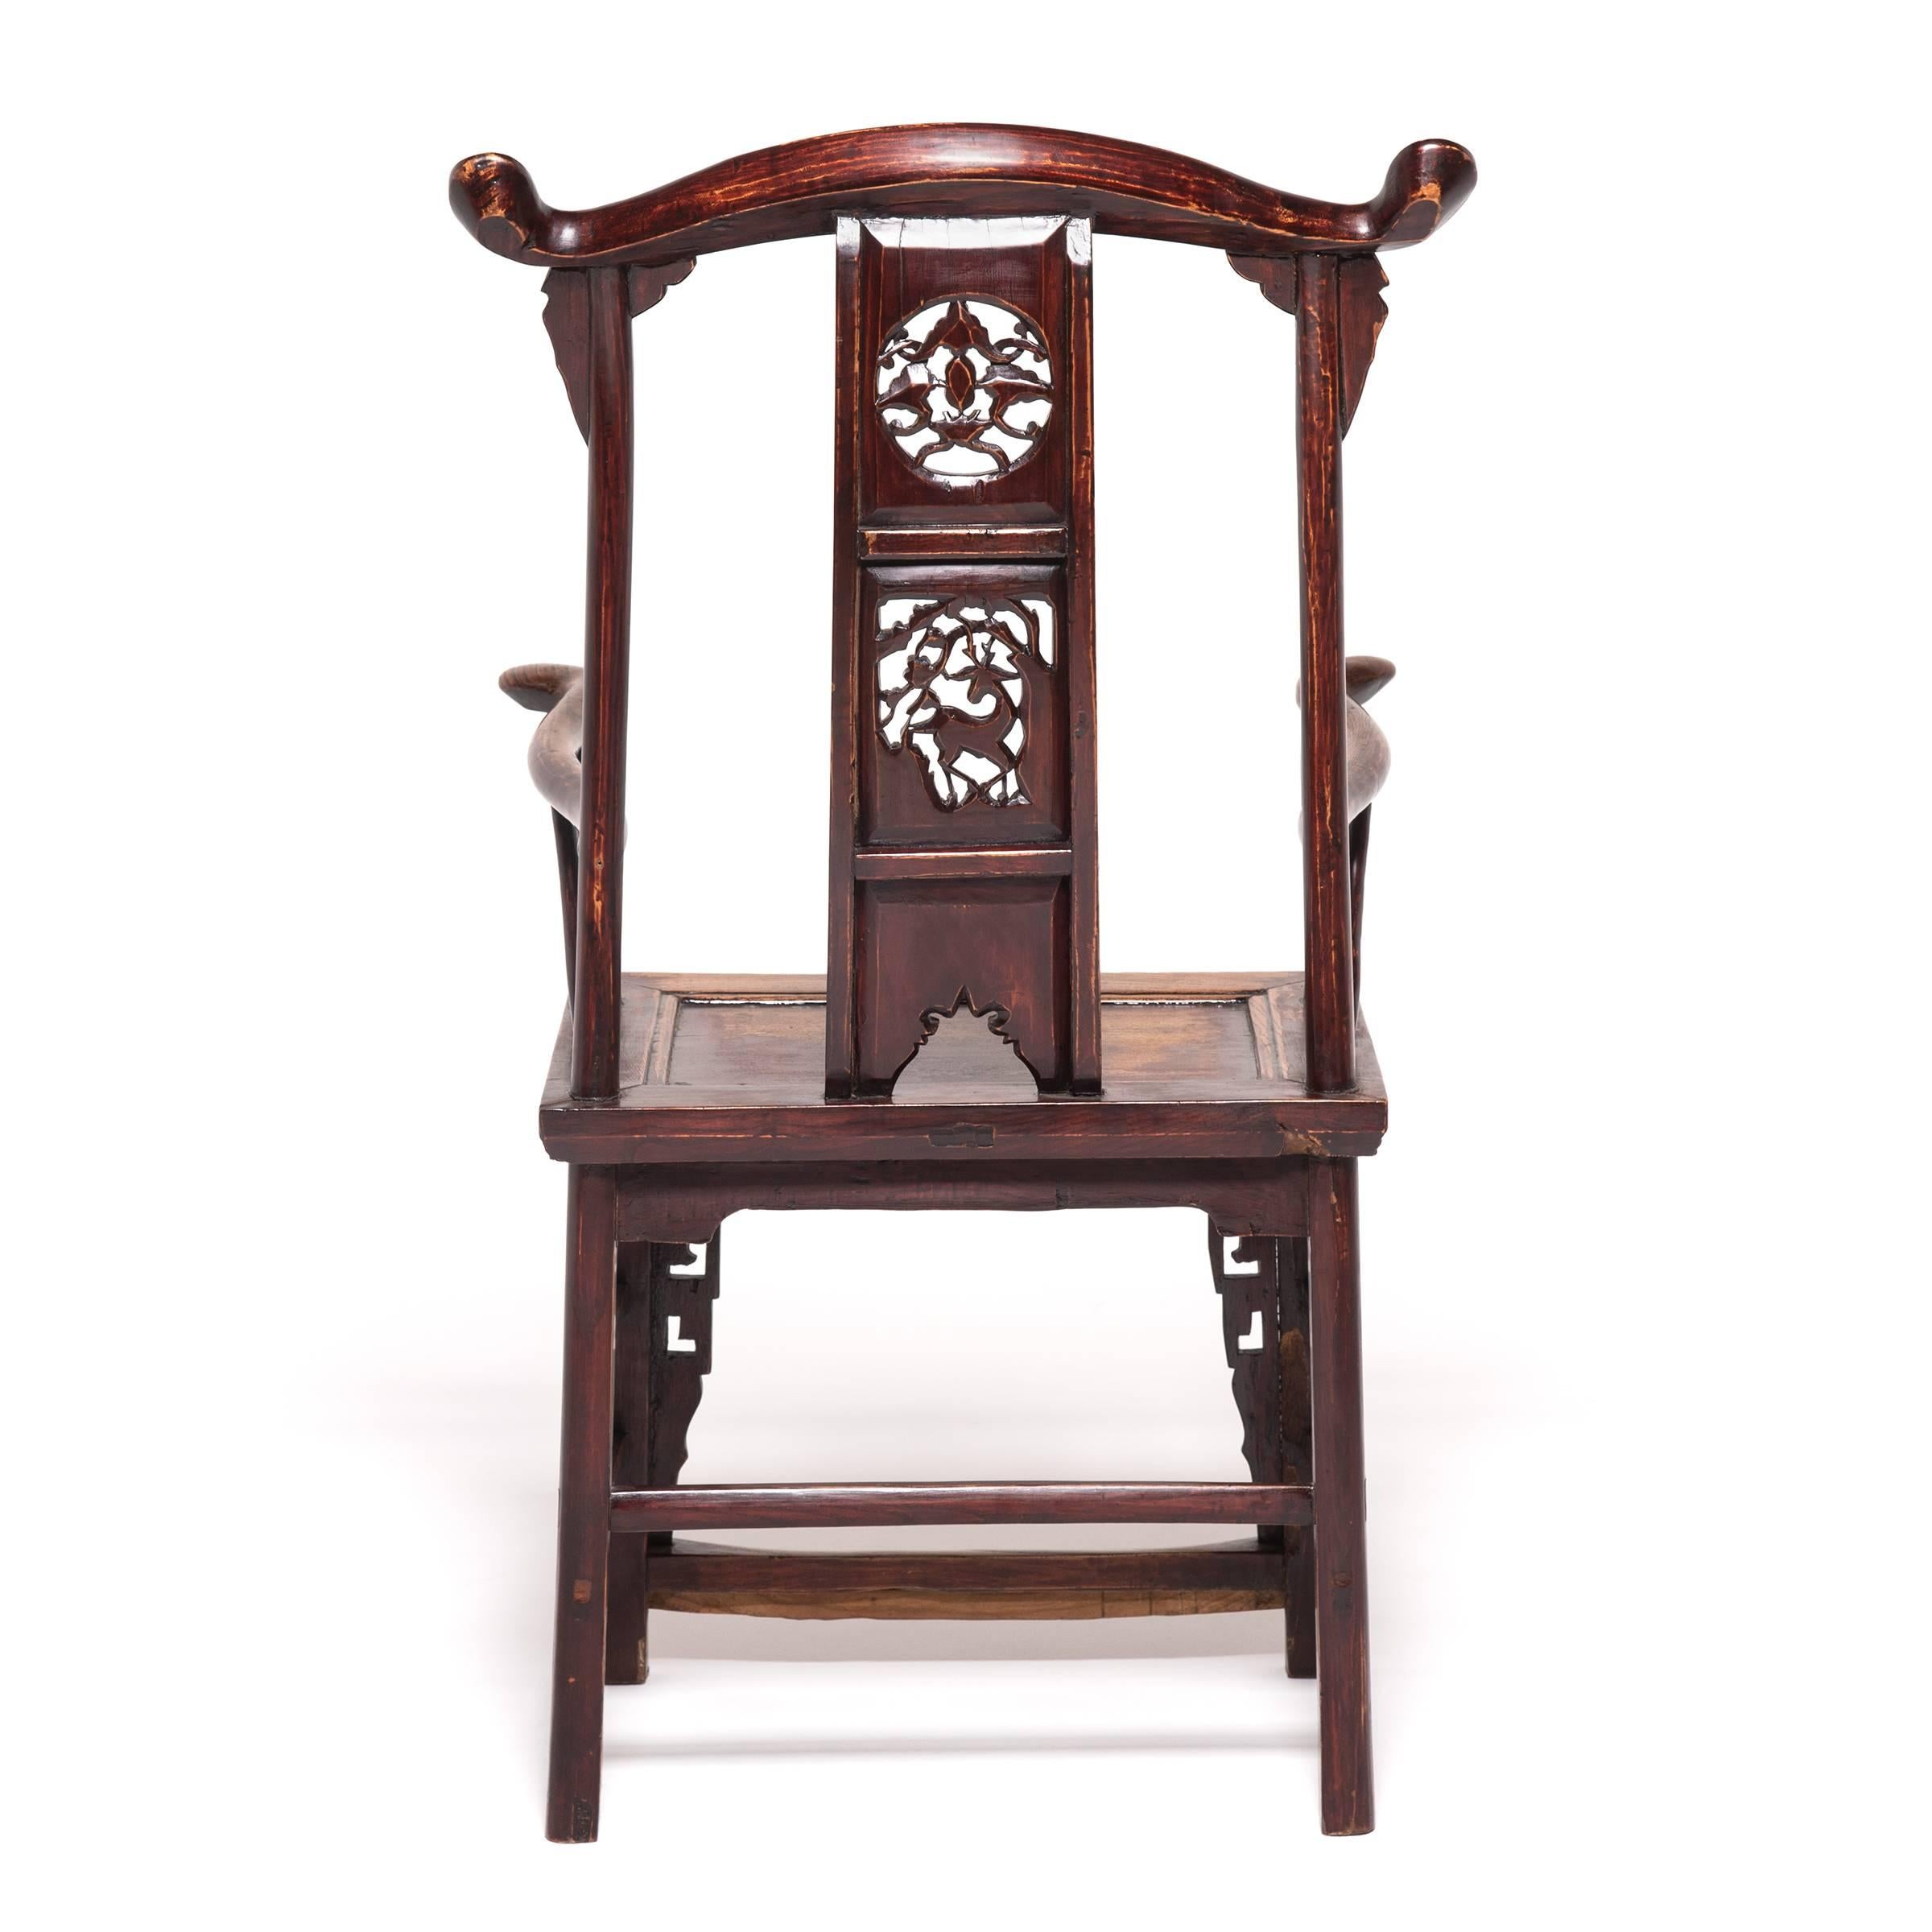 Carved Pair of Chinese Tall Back Chairs with Auspicious Deer Medallions, c. 1850